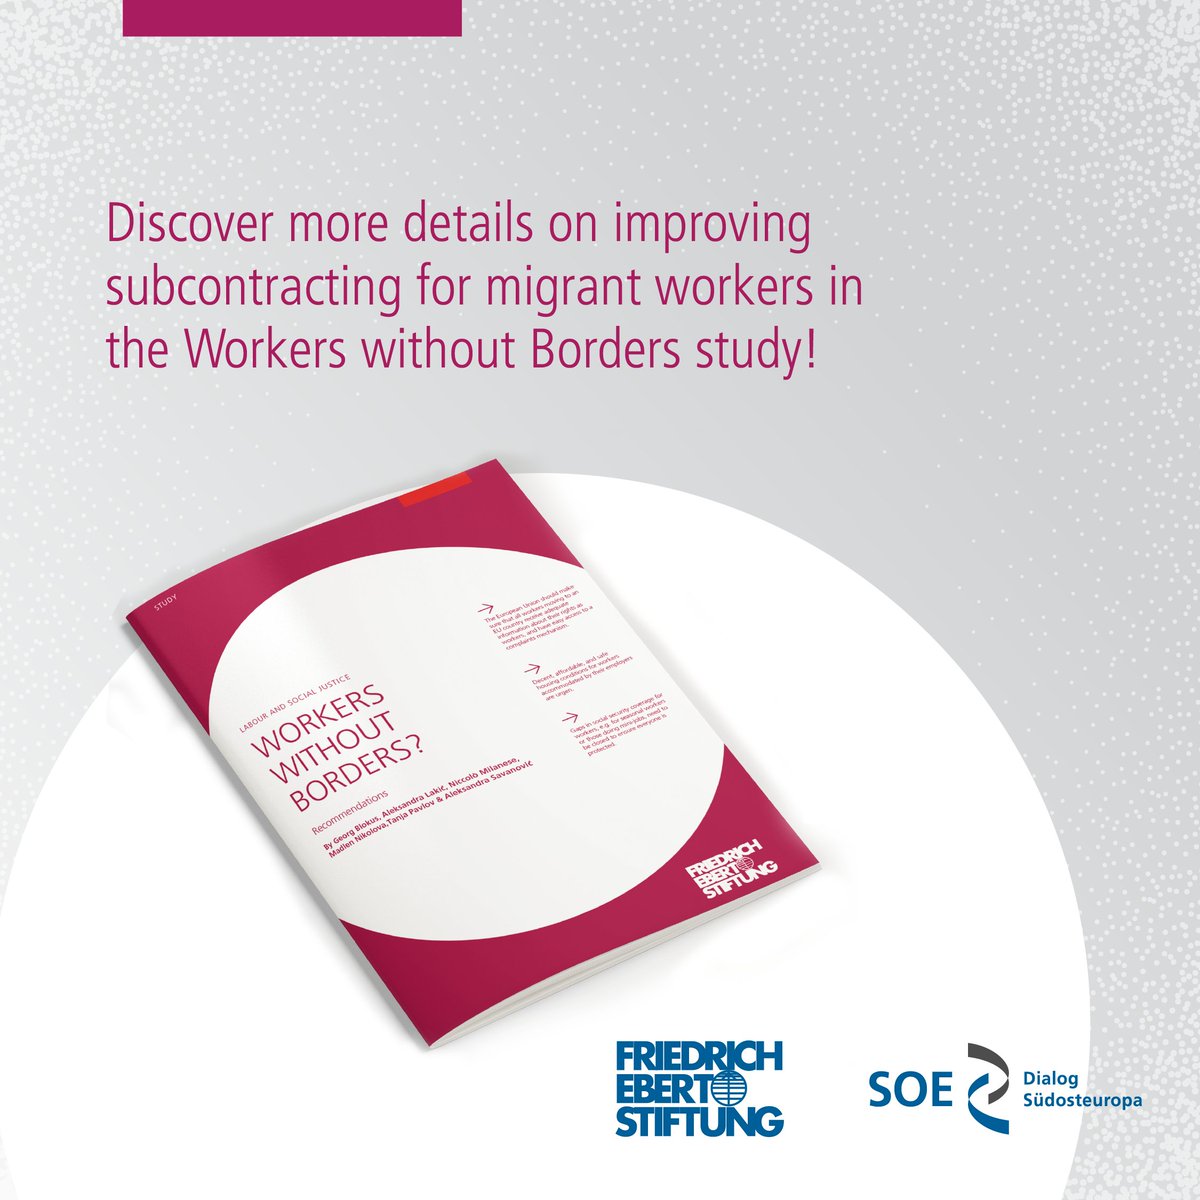 What are the flaws of current subcontracting practices for migrant workers in the EU? Find out in our Workers without Borders report: library.fes.de/pdf-files/buer…

#socialpolicy #eulaborregulations #laborlaw #workersrights #MigrantWorker